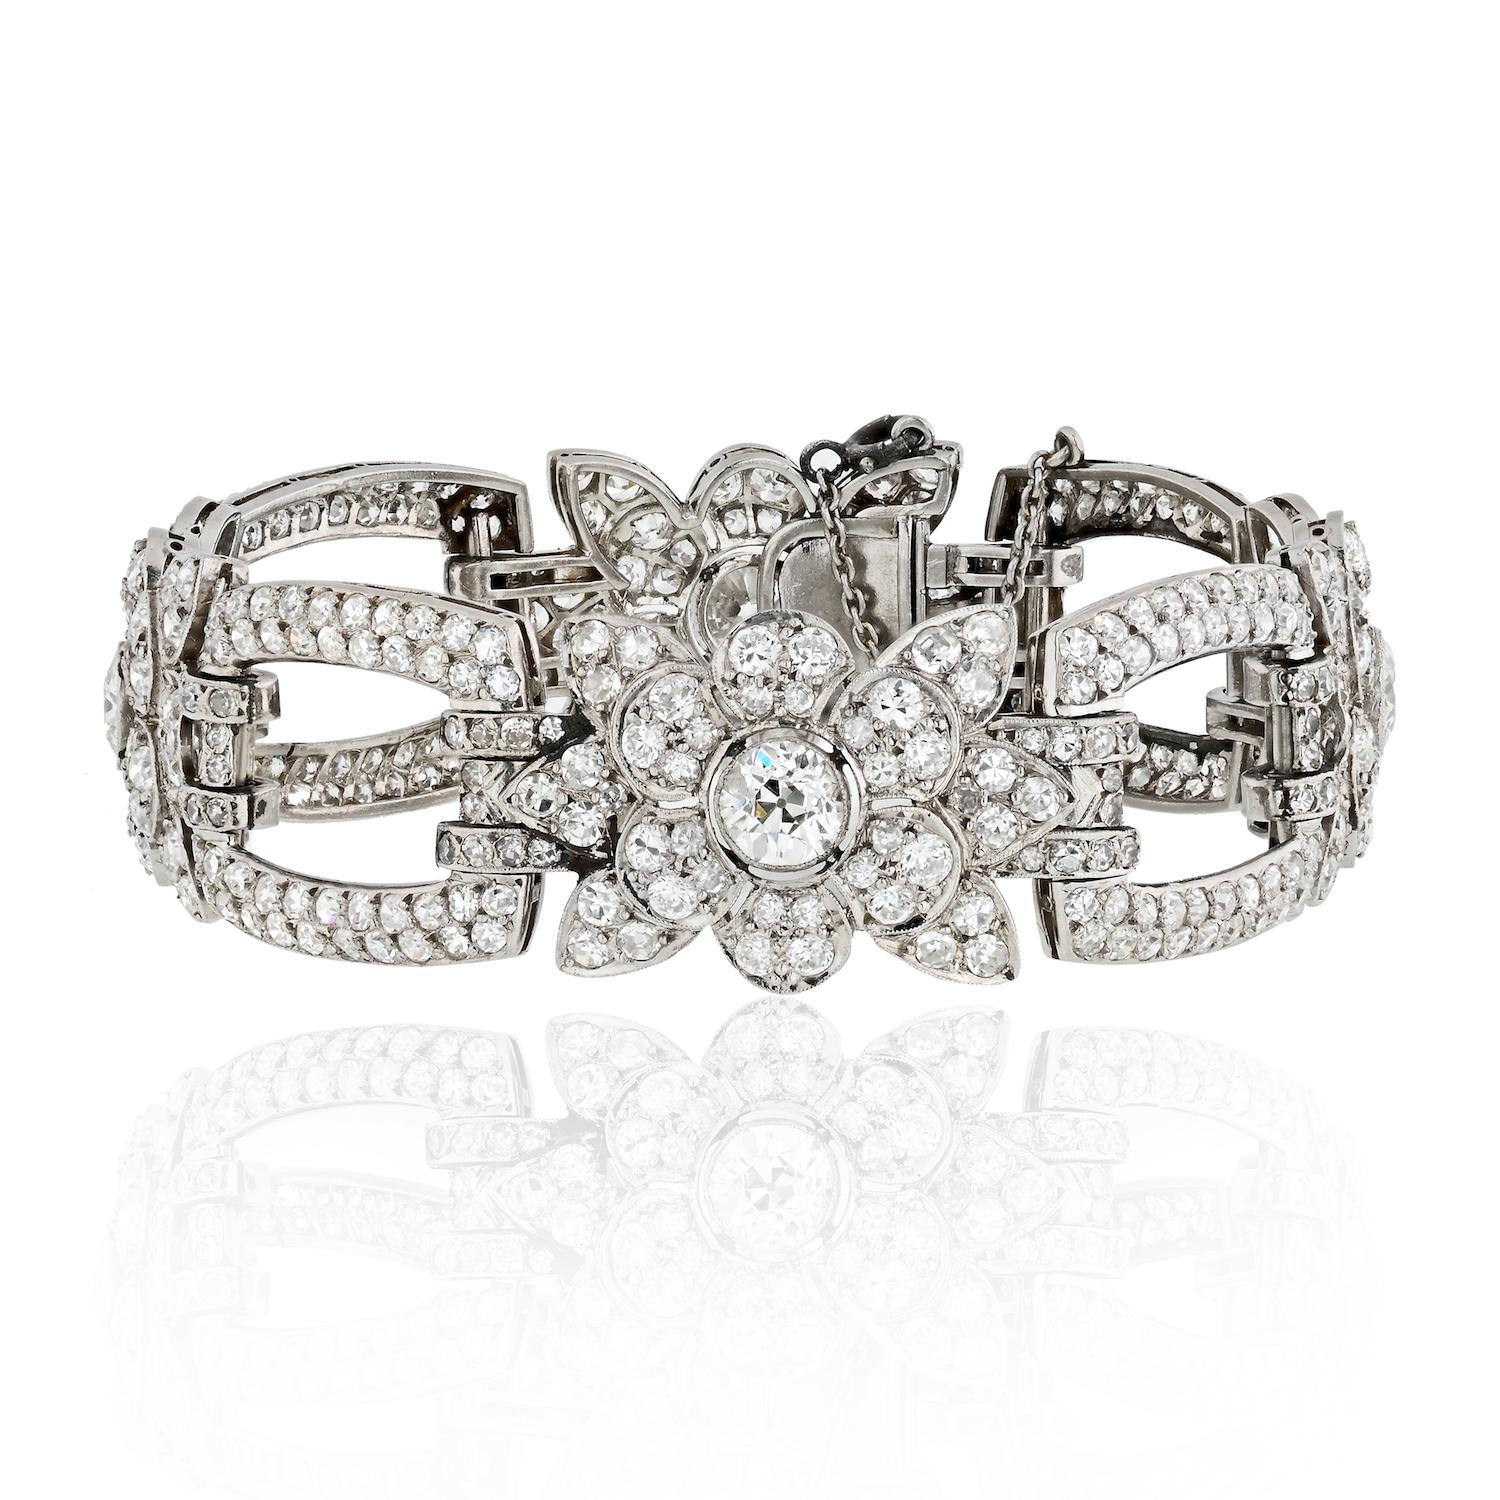 This gorgeous meticulously handcrafted and unique bracelet is sure to get everybody's glance.
This exquisite diamond bracelet is expertly crafted in solid platinum and comes to us from 1930's. Composed of flexible openwork panels, encrusted with a